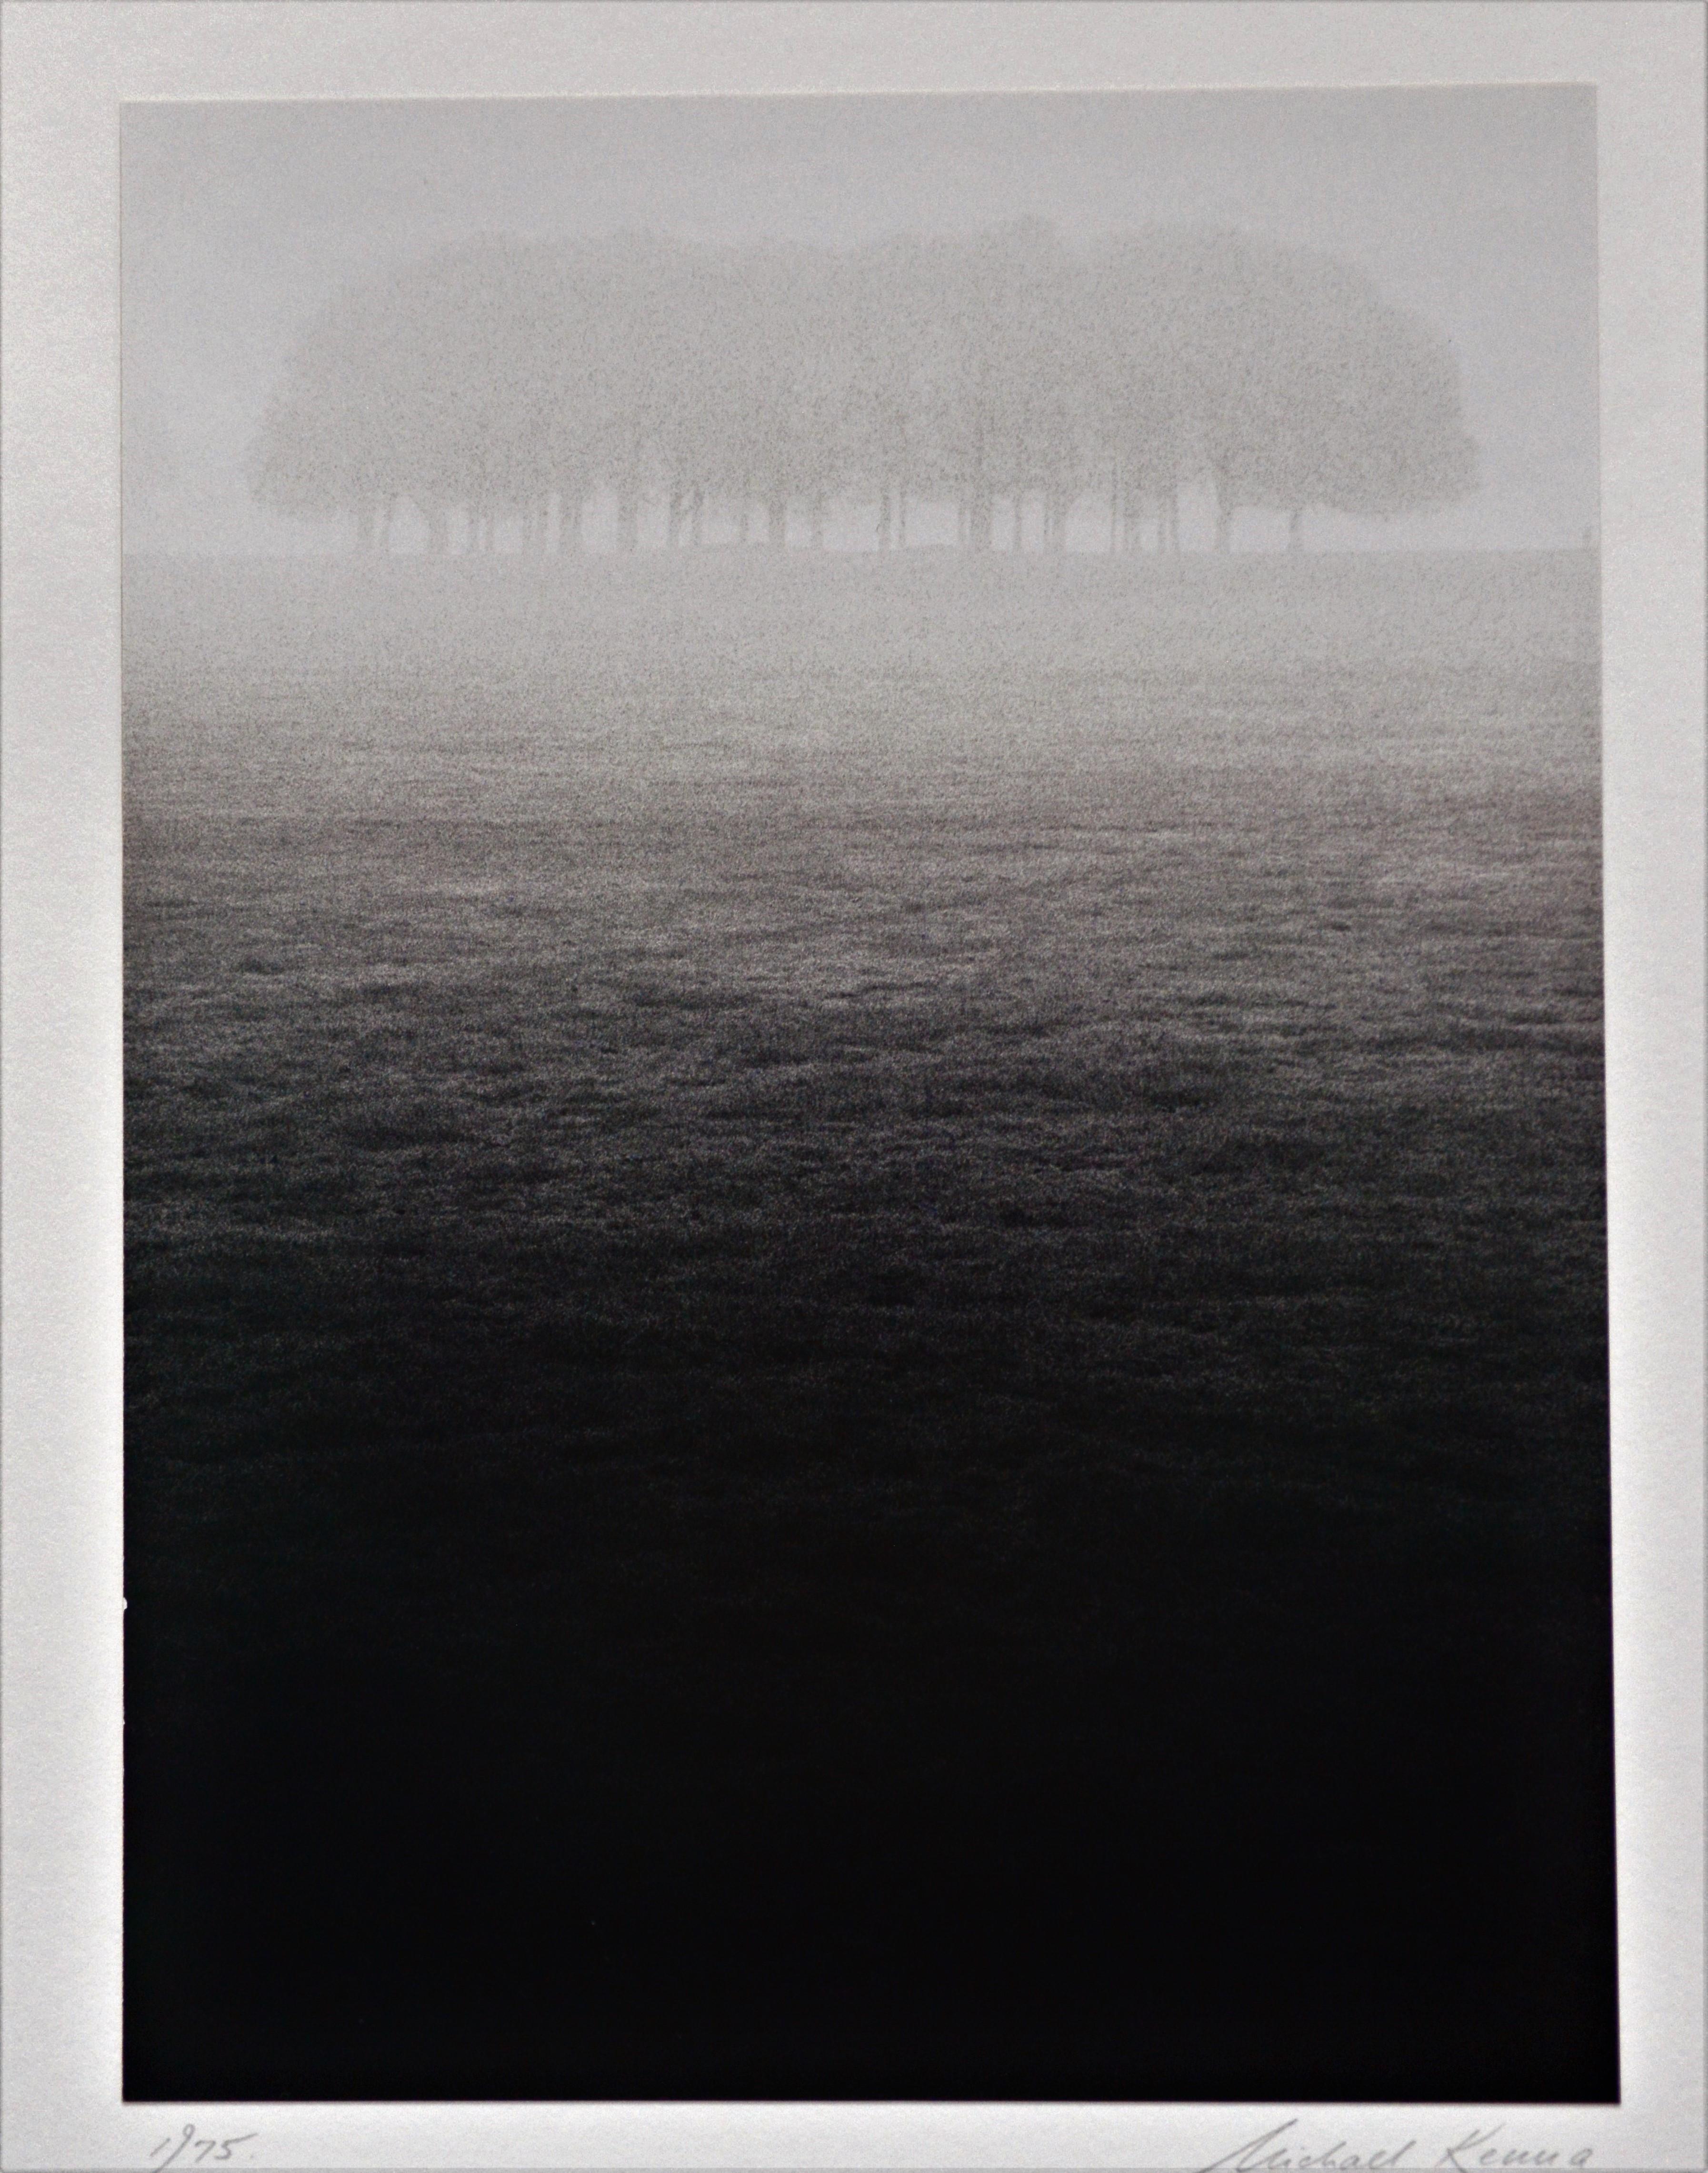 Michael Kenna (American/British, born 1953)
Title: Trees-Richmond-Surrey-England, 1975
Medium: Selenium tone gelatin silver print. 
Artist signed and dated in pencil. No. 43 of 90. Print Date: 1981.
Sheet size: 6.6